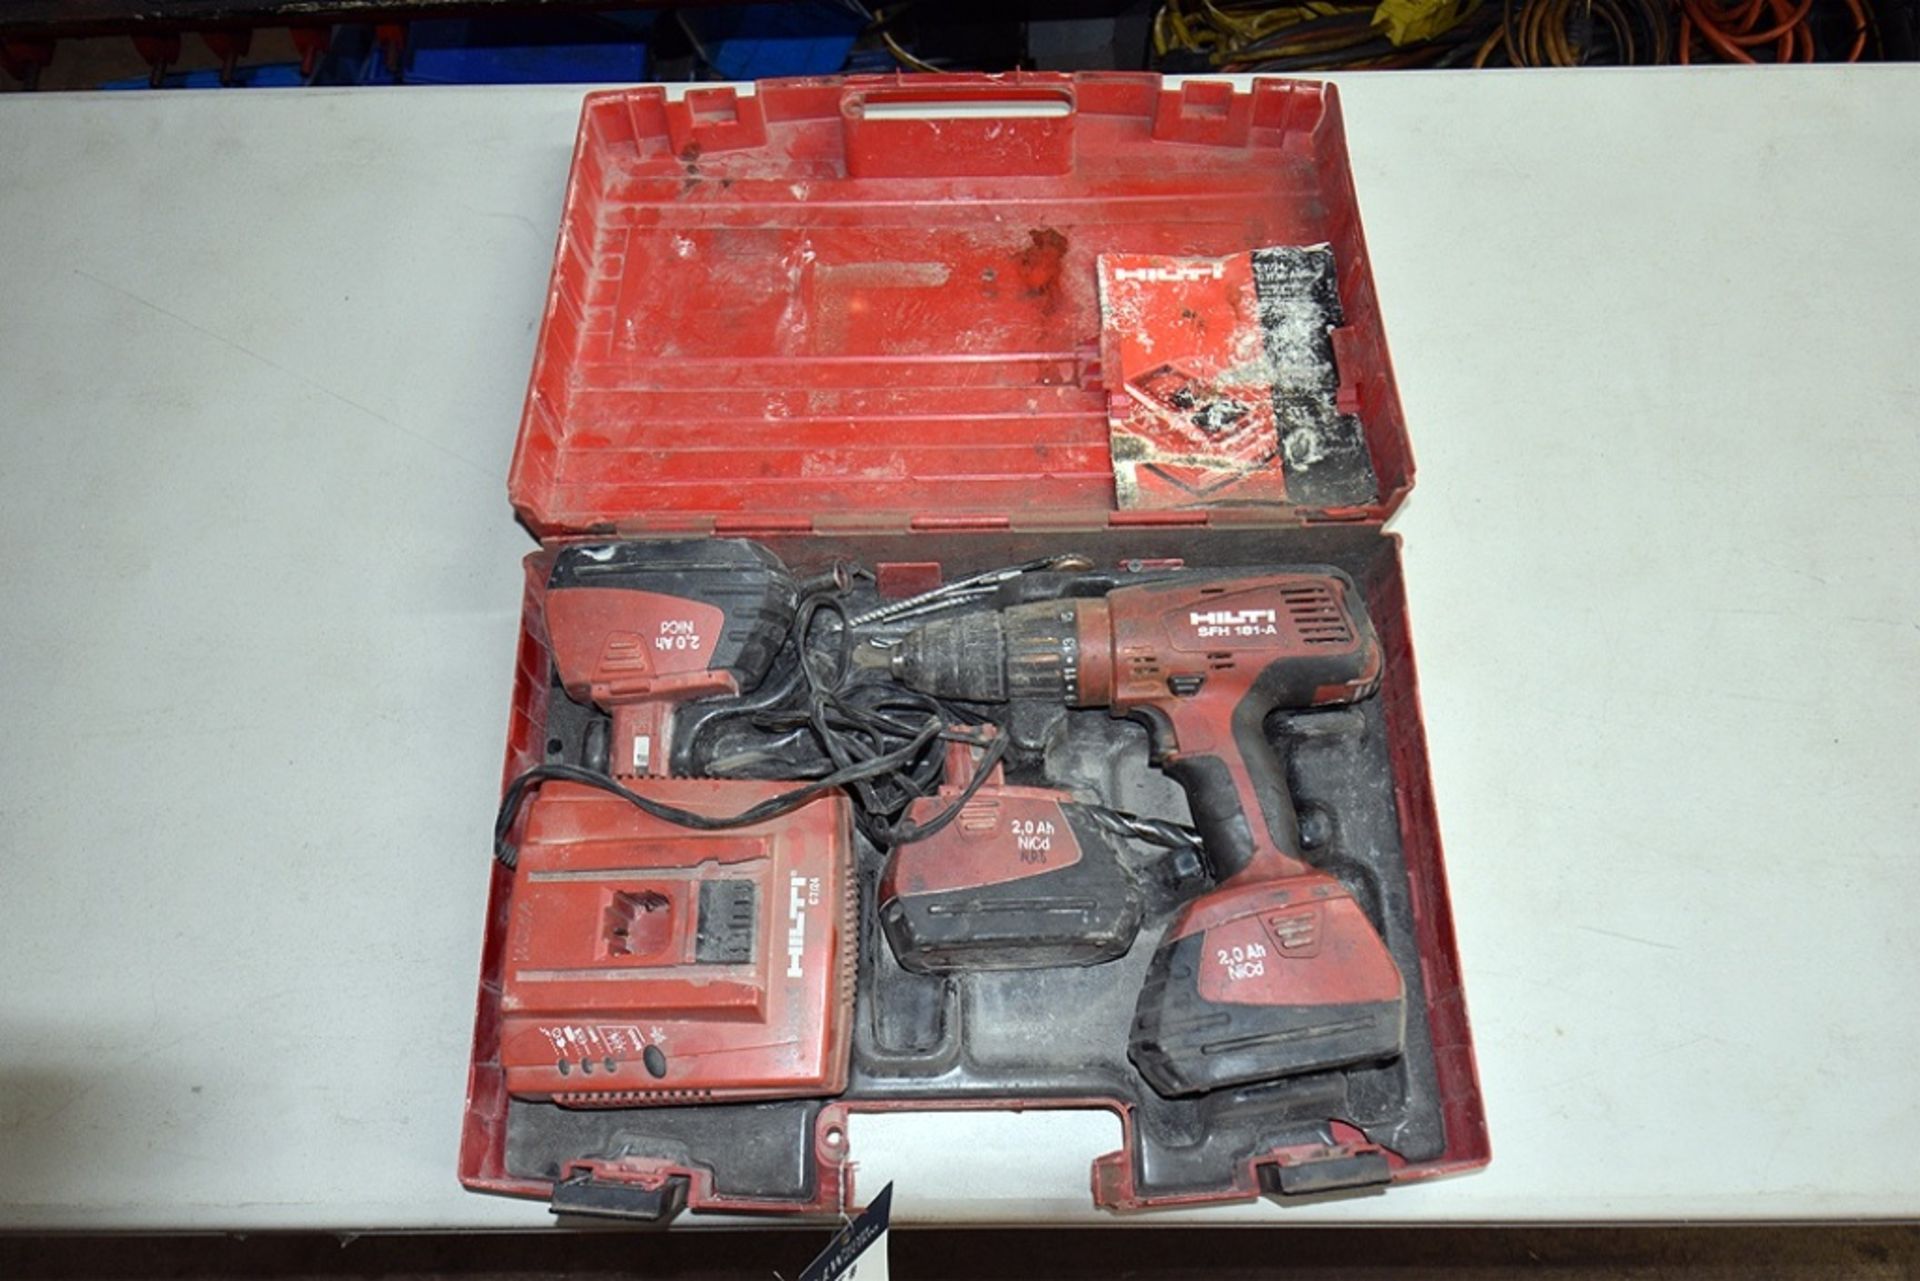 Hilti SFH 181-A Cordless Driver w/ (3) 18v NiCd Battery, (1) Charger, and (1) Case